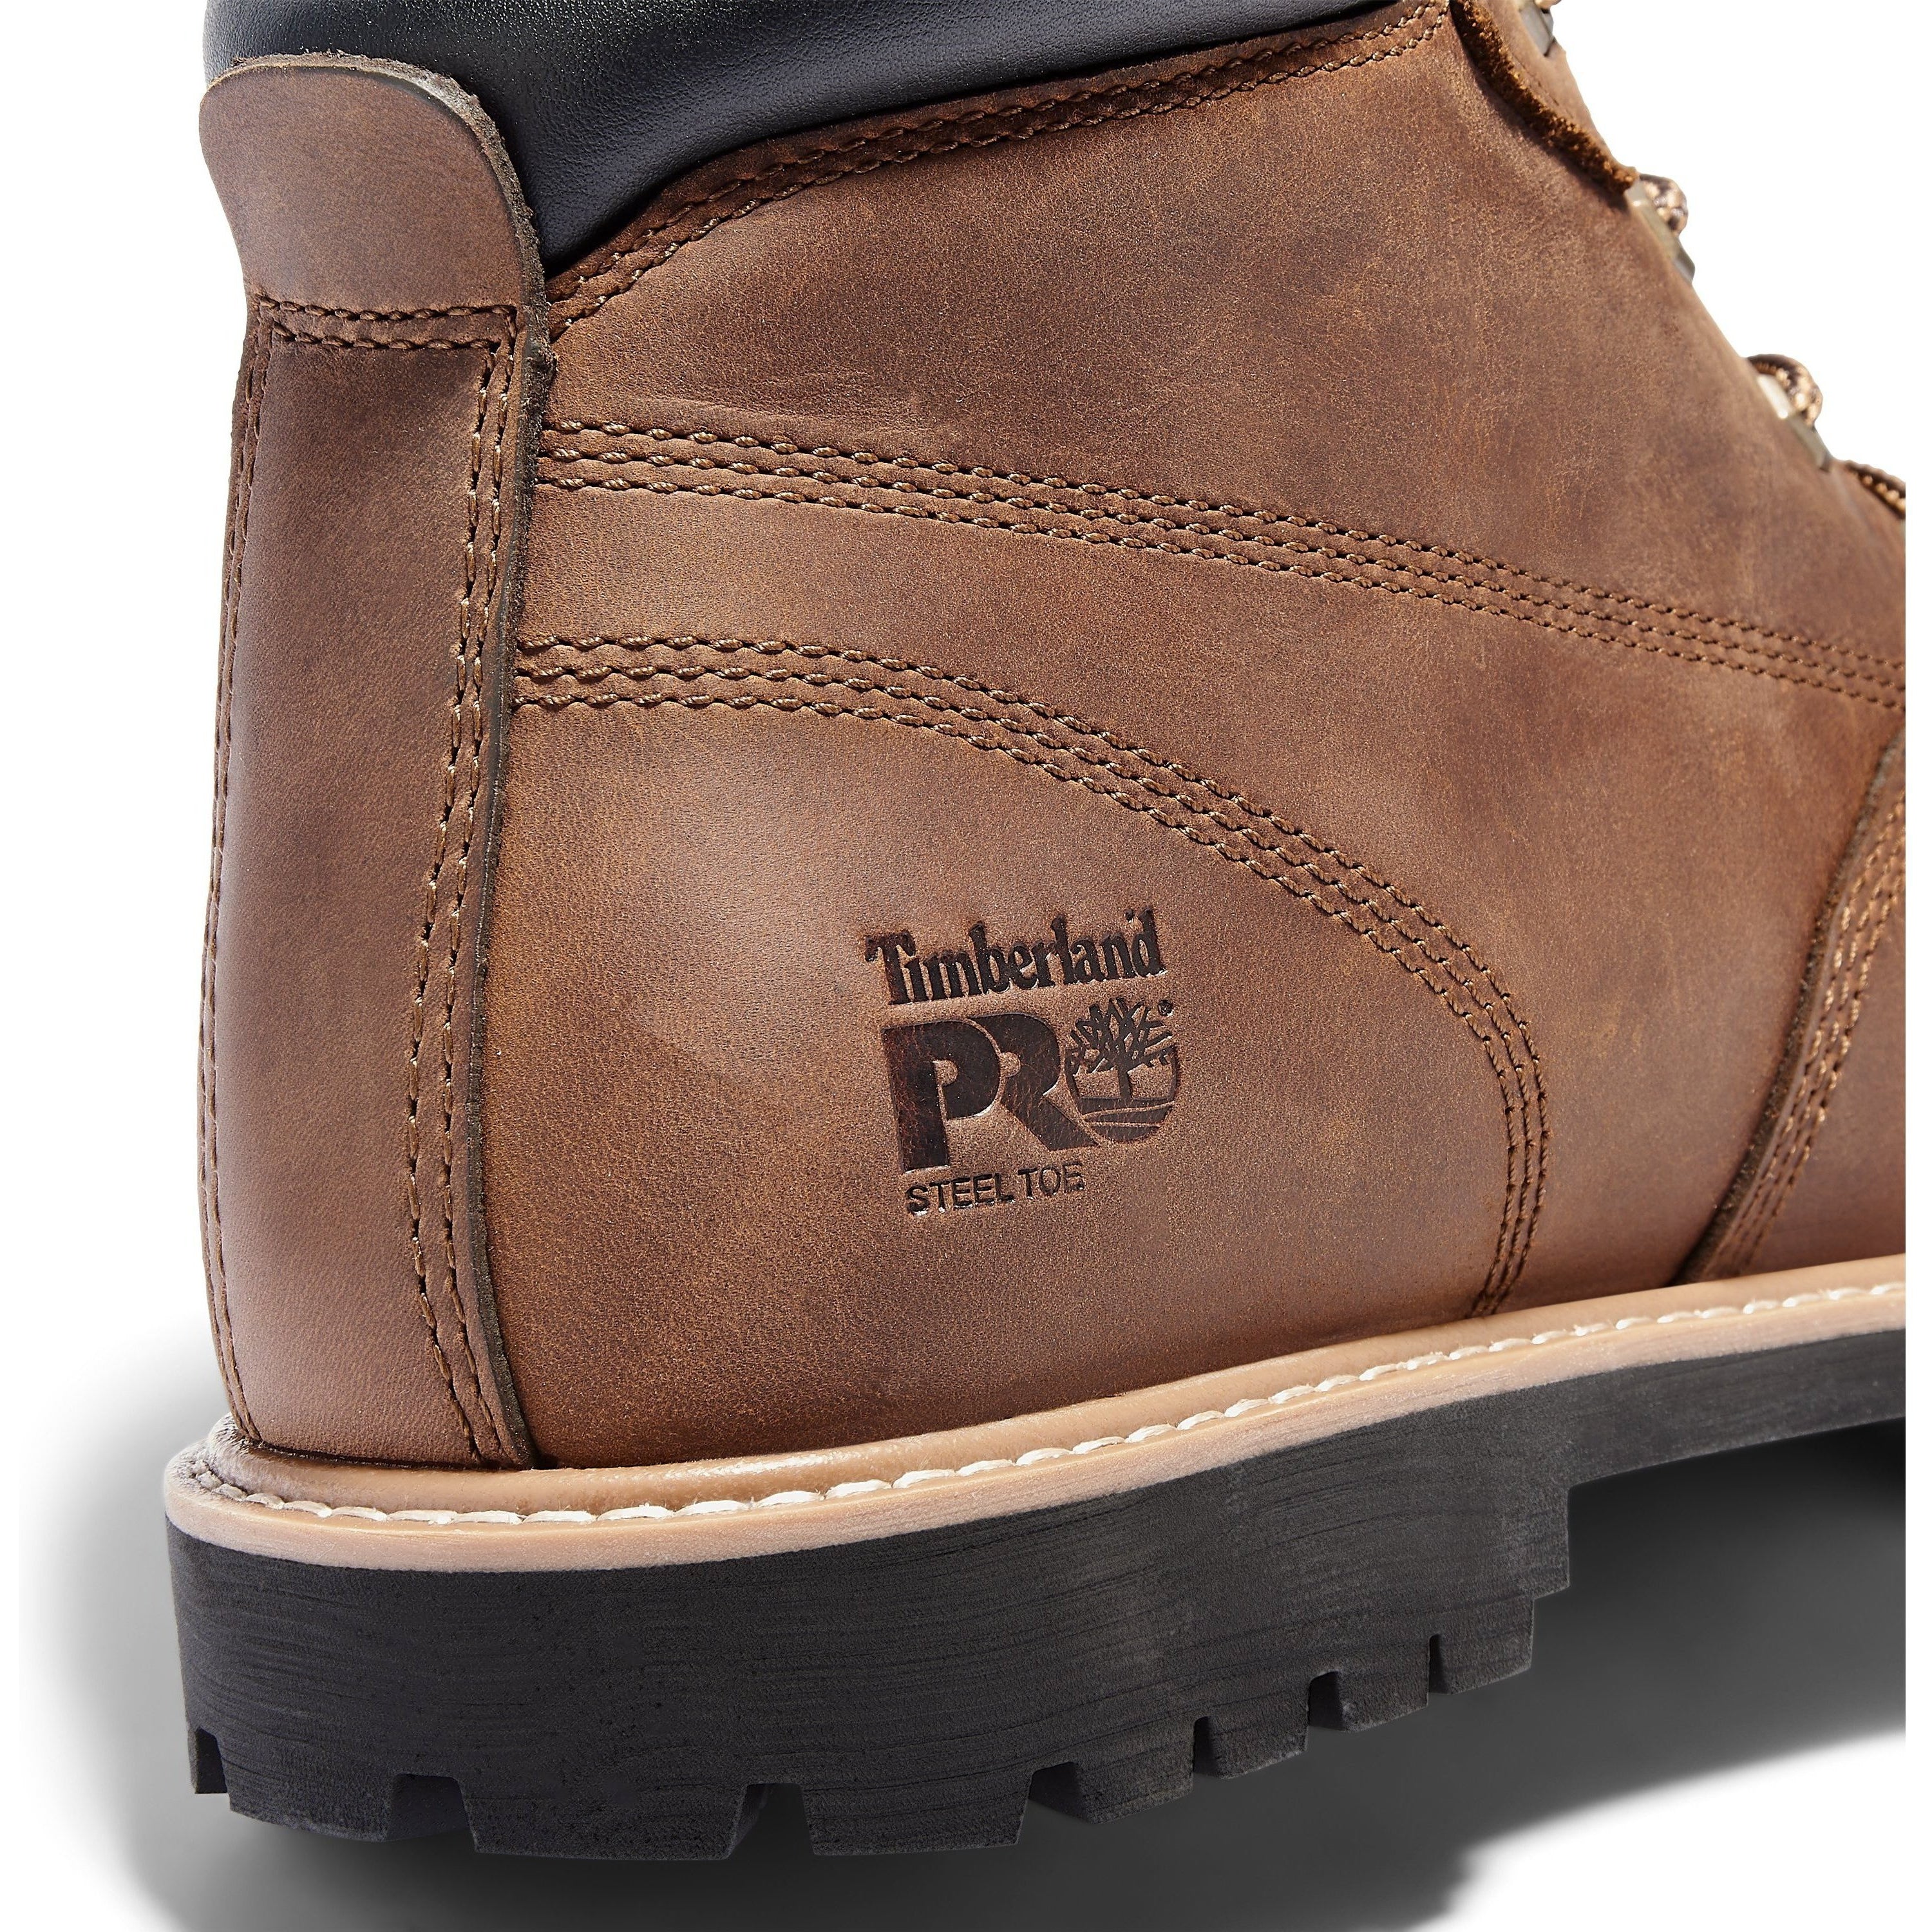 Timberland PRO Men's Gritstone 6" Steel Toe Work Boot - TB0A1Q8D214  - Overlook Boots